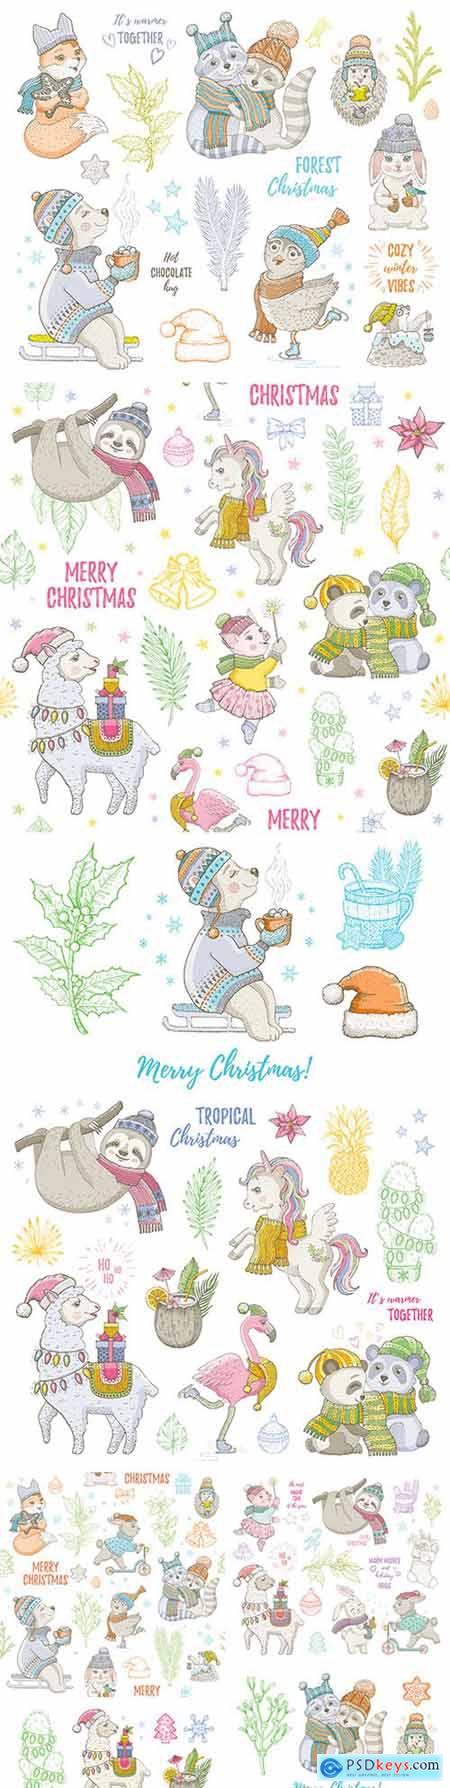 Merry Christmas cute forest beasts painted illustrations